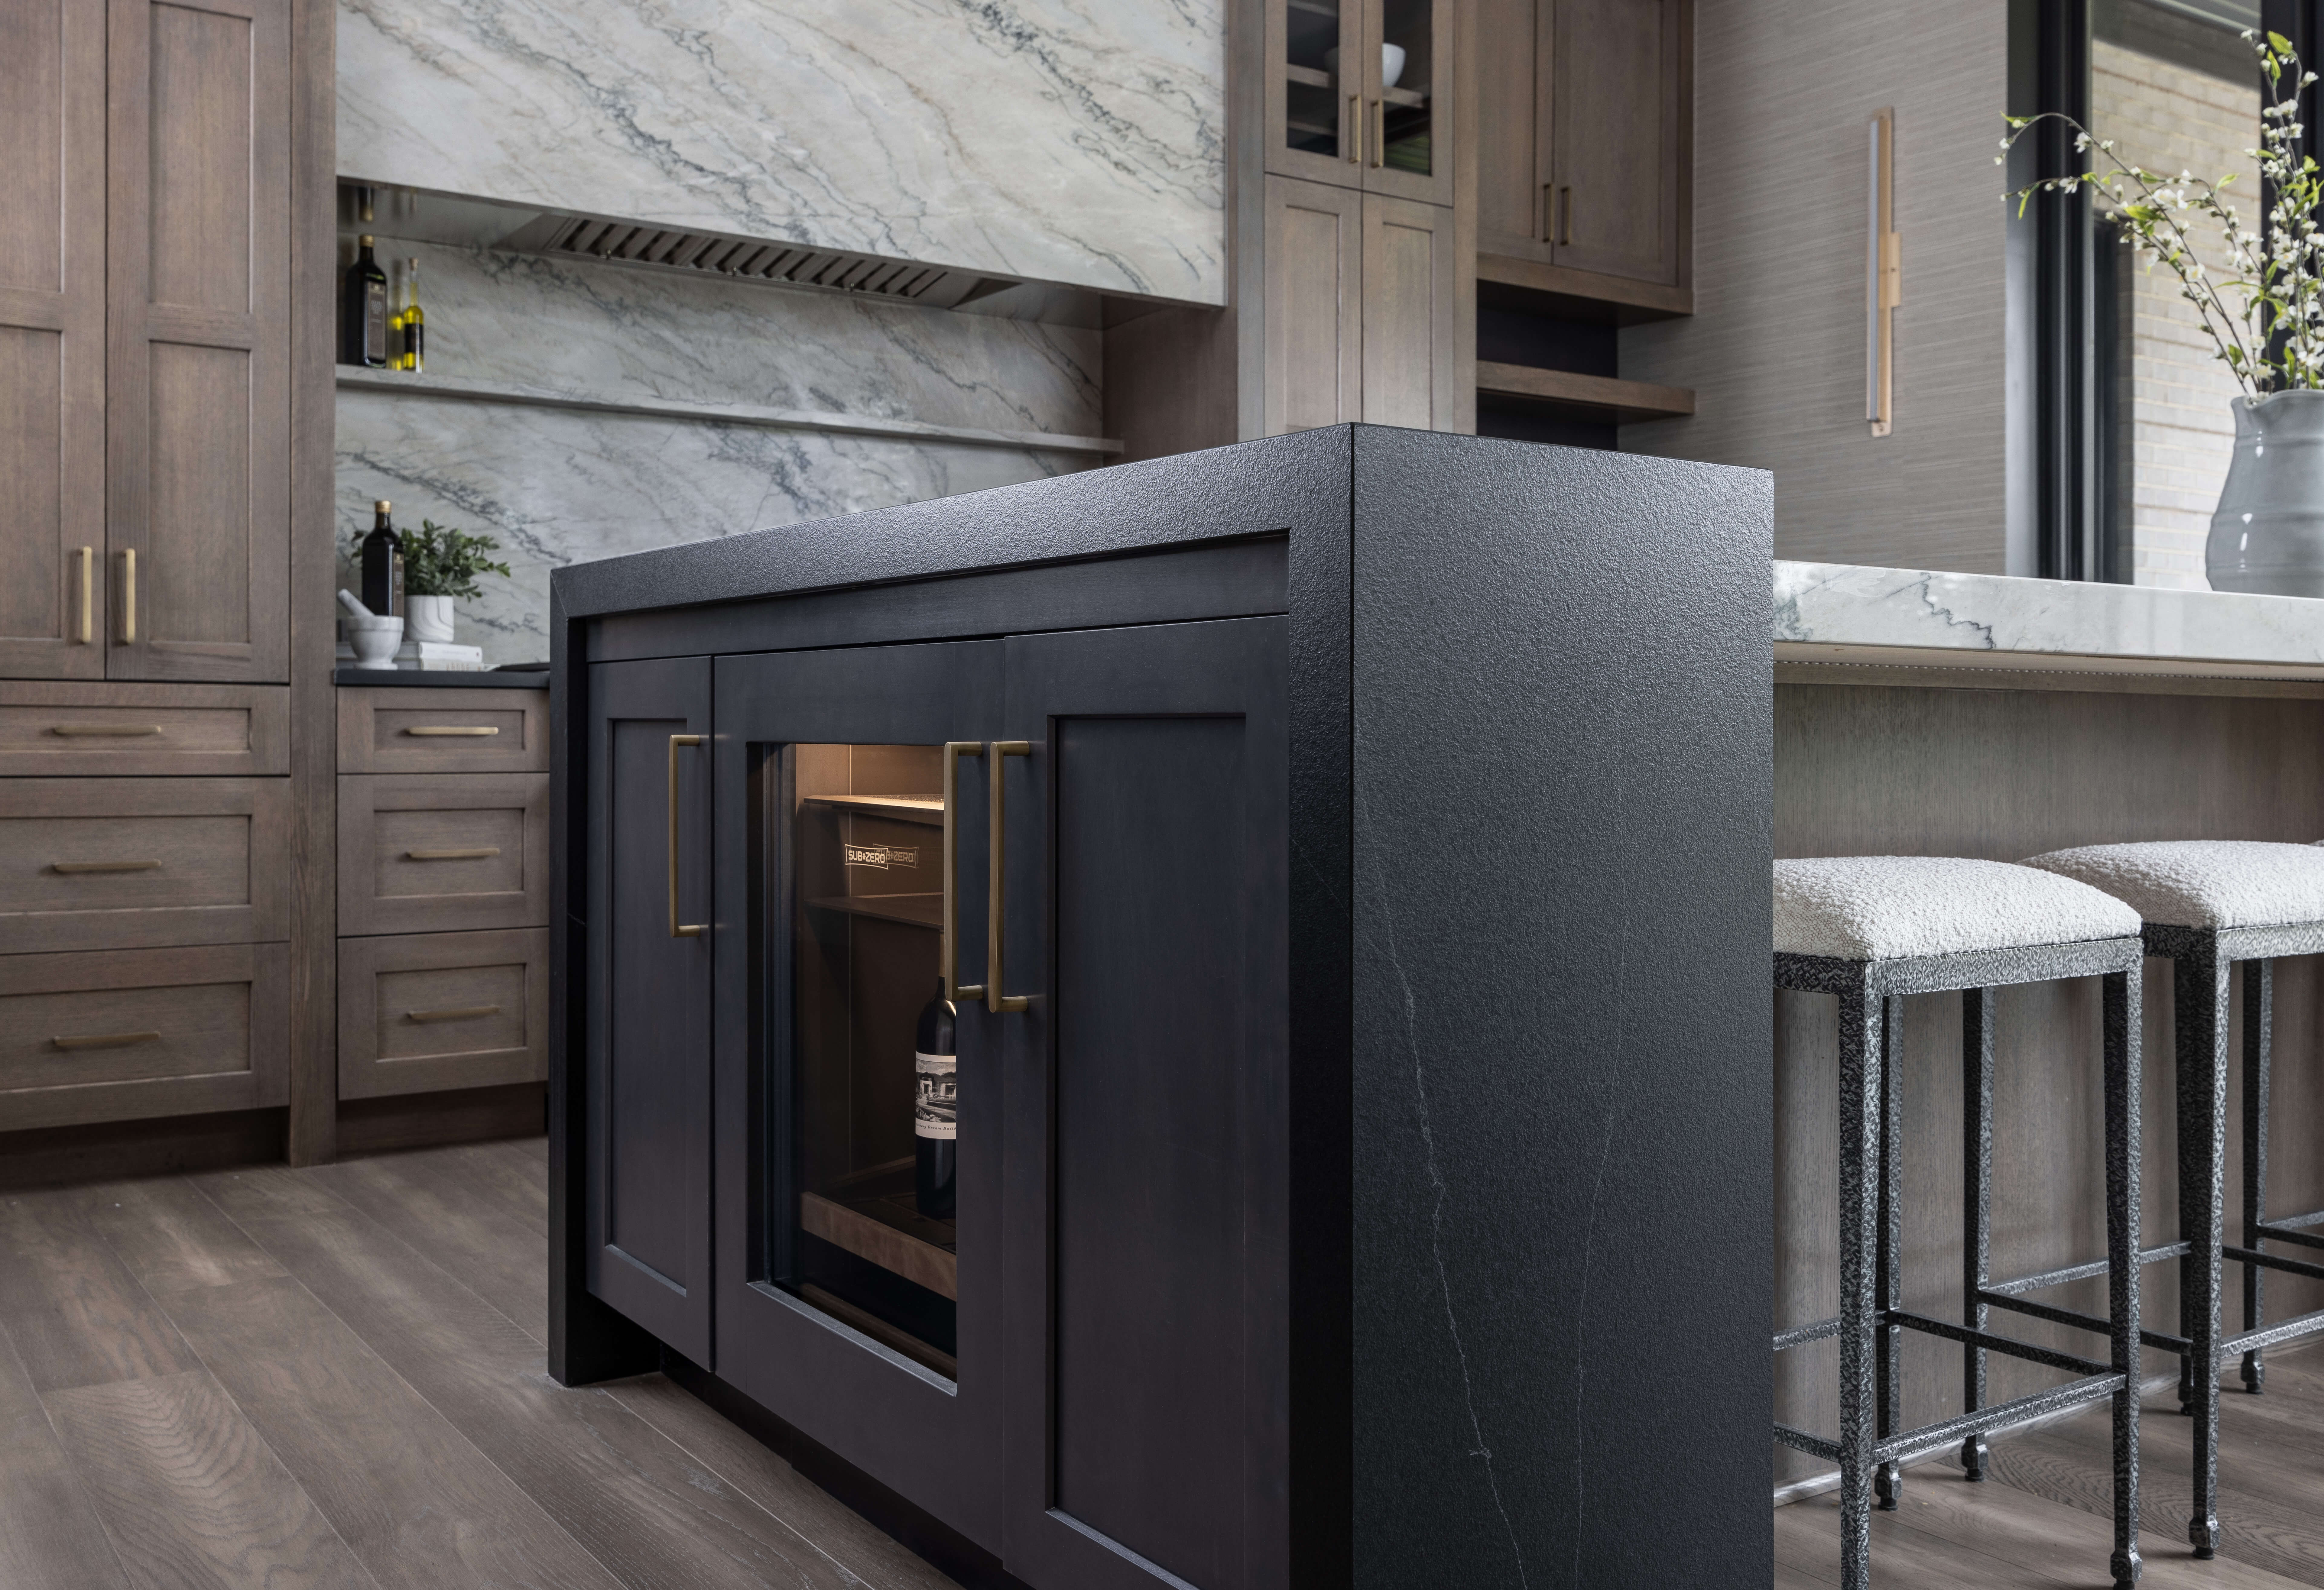 A black kitchen end cap with a beverage fridge and waterfall countertops that wrap the beverage center.